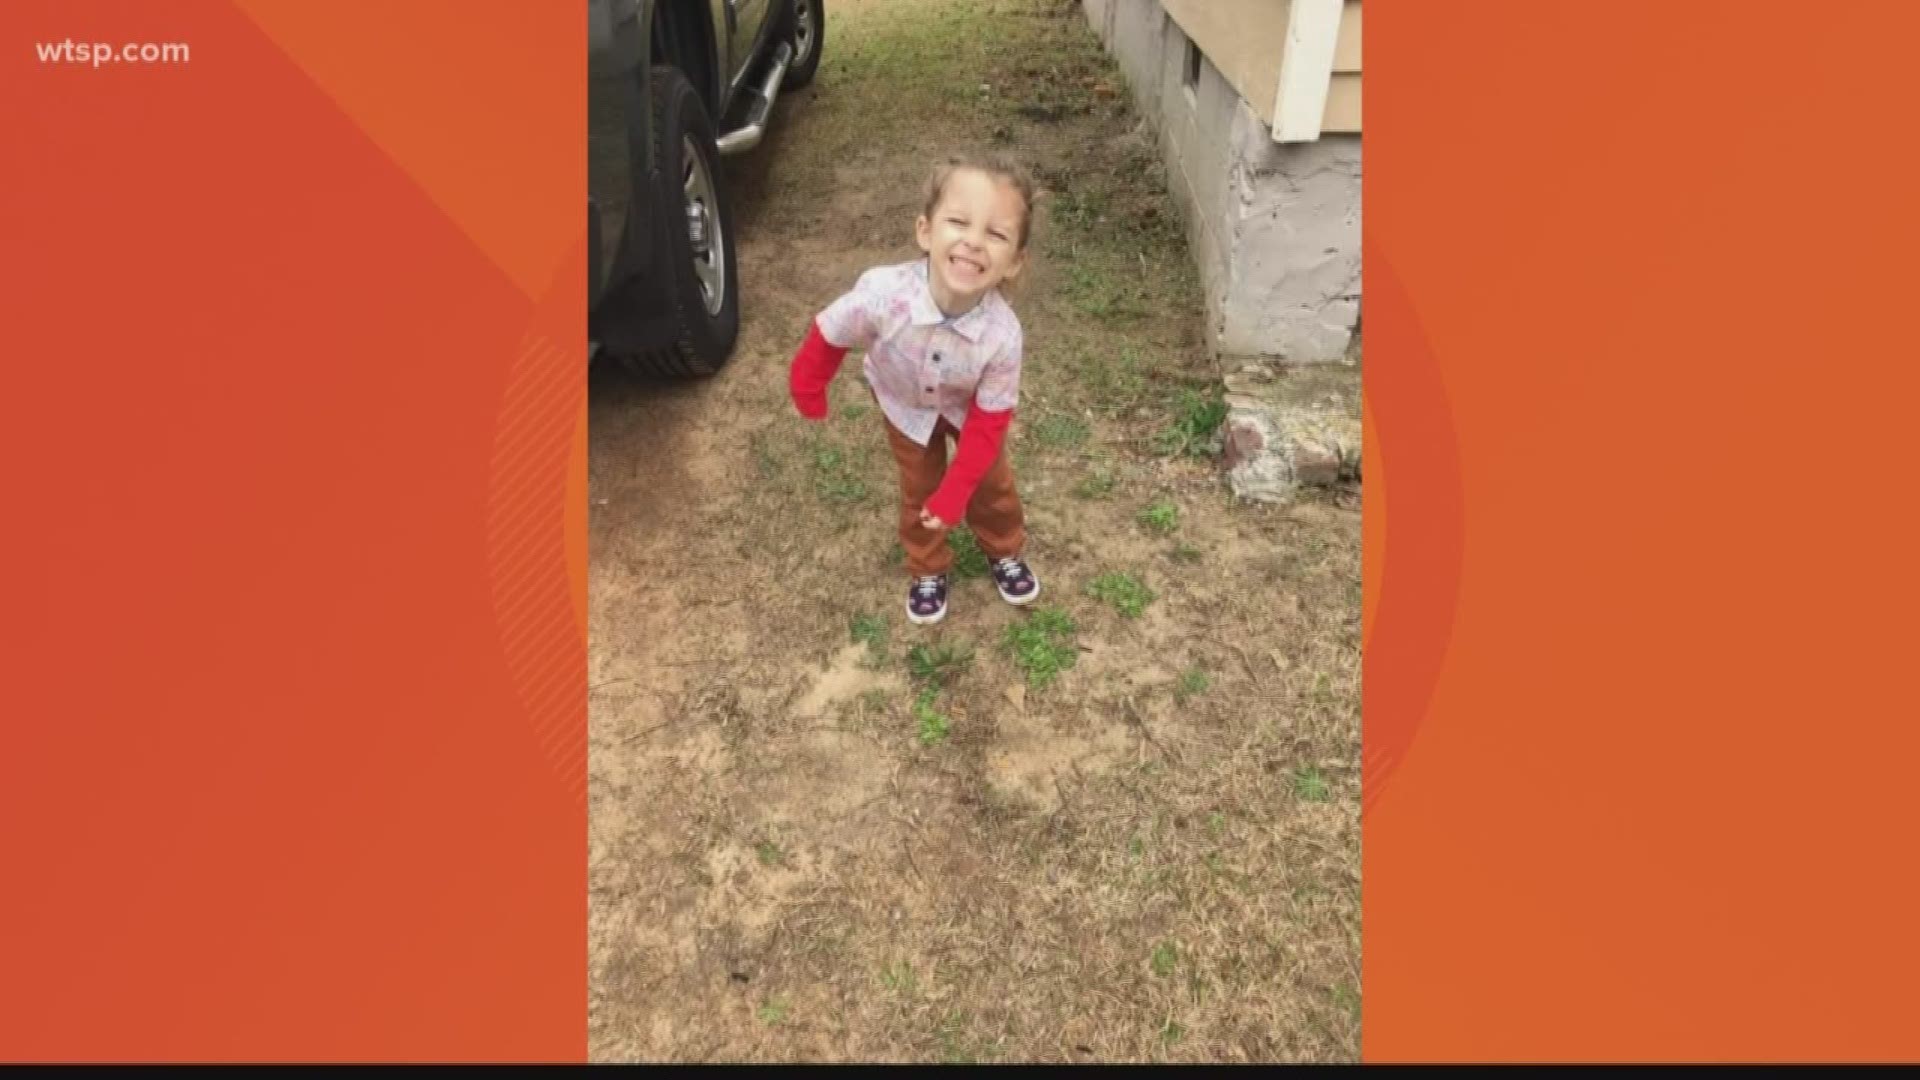 A Hillsborough County judge has ordered the parents of a 3-year-old boy with cancer must get him chemotherapy. https://on.wtsp.com/2PUG0yt